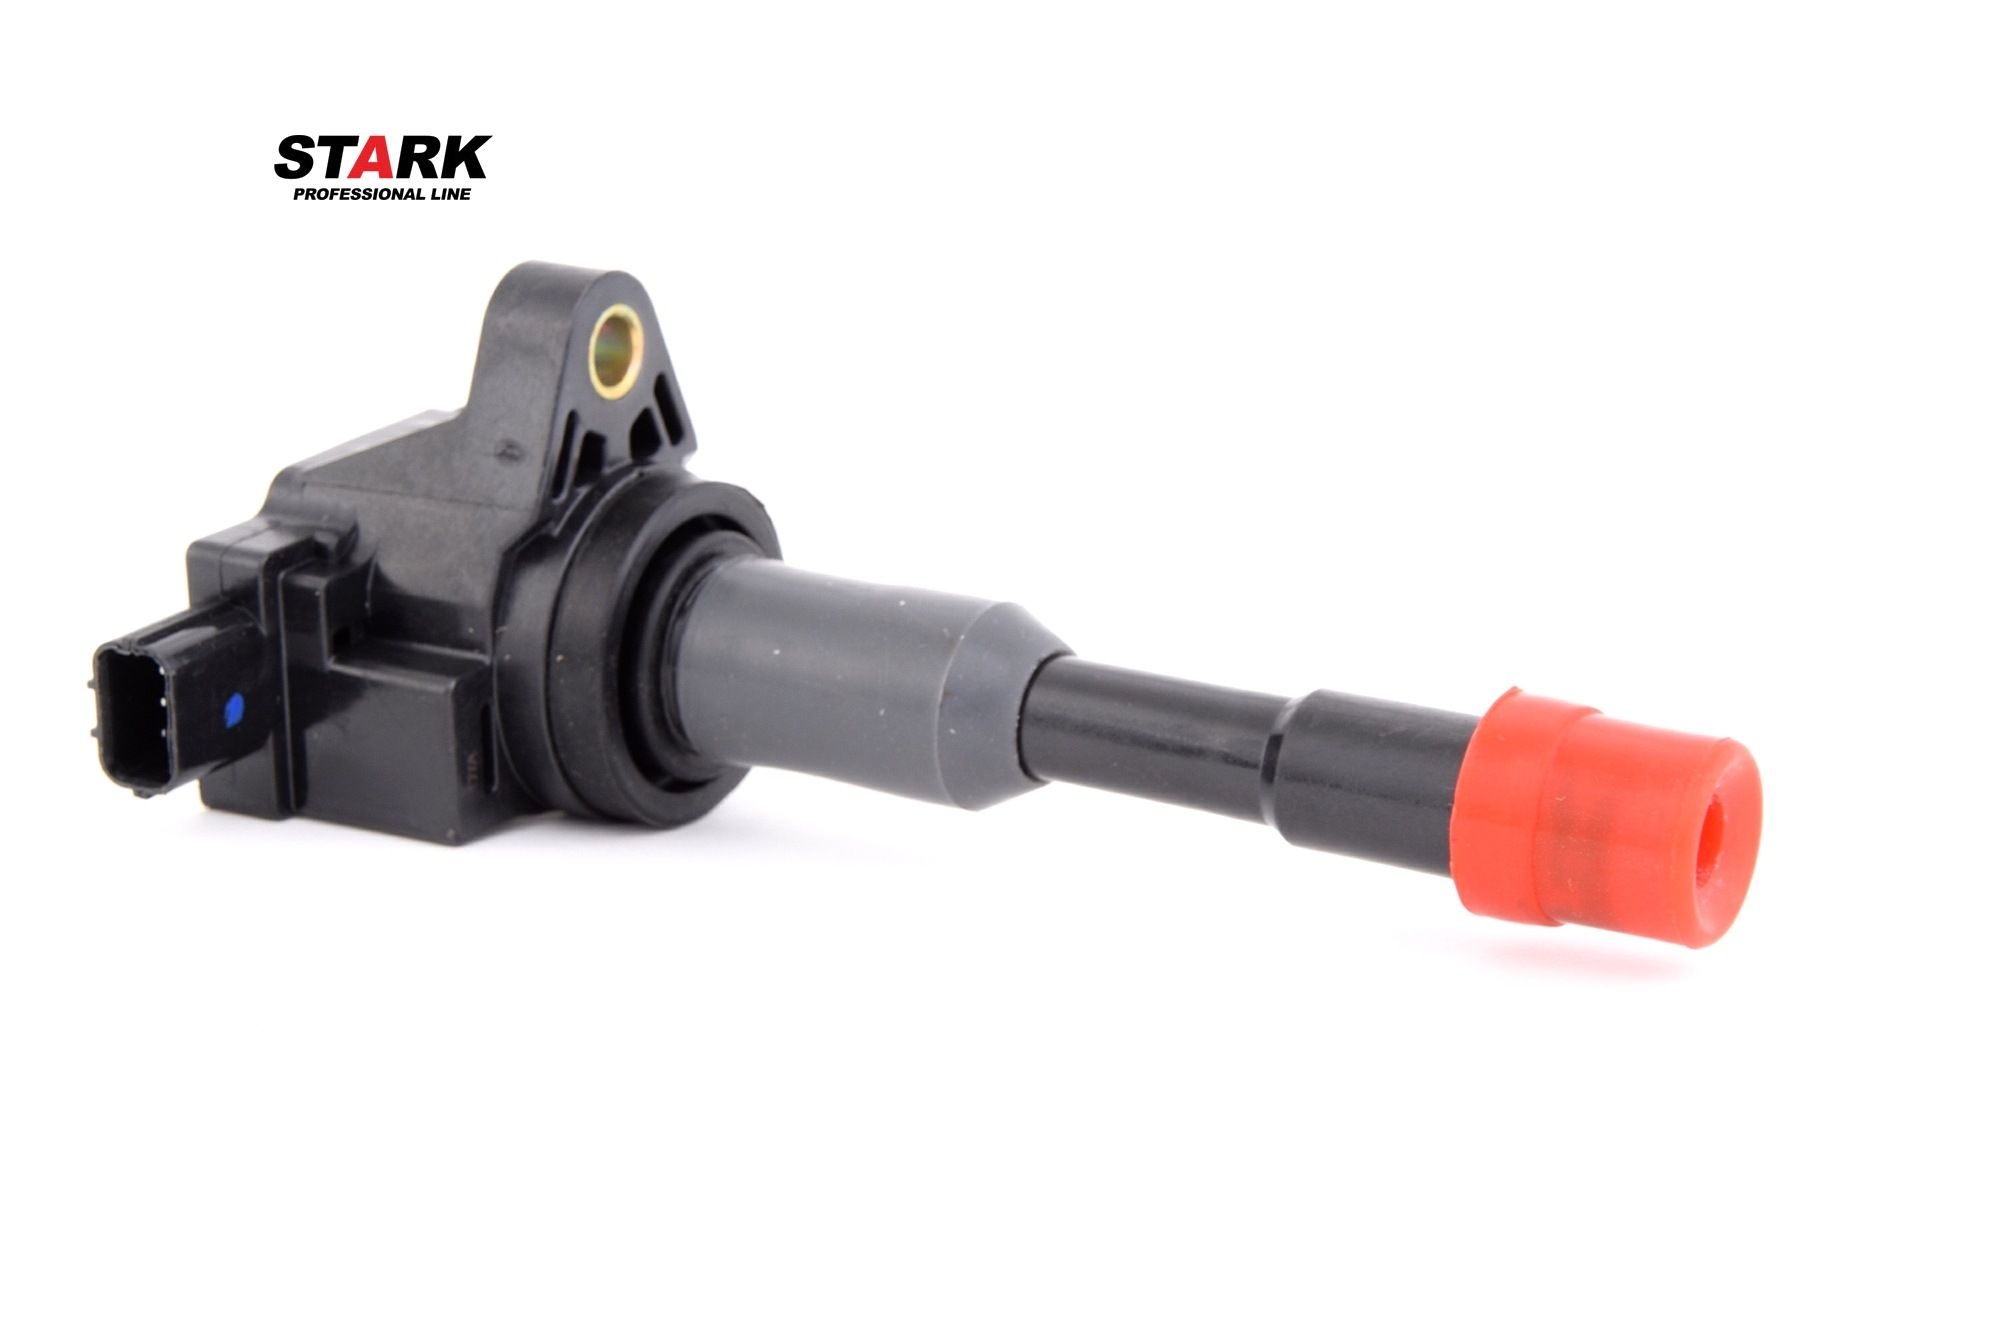 STARK SKCO-0070144 Ignition coil 3-pin connector, Flush-Fitting Pencil Ignition Coils, Исполнение разъема SAE, incl. spark plug connector